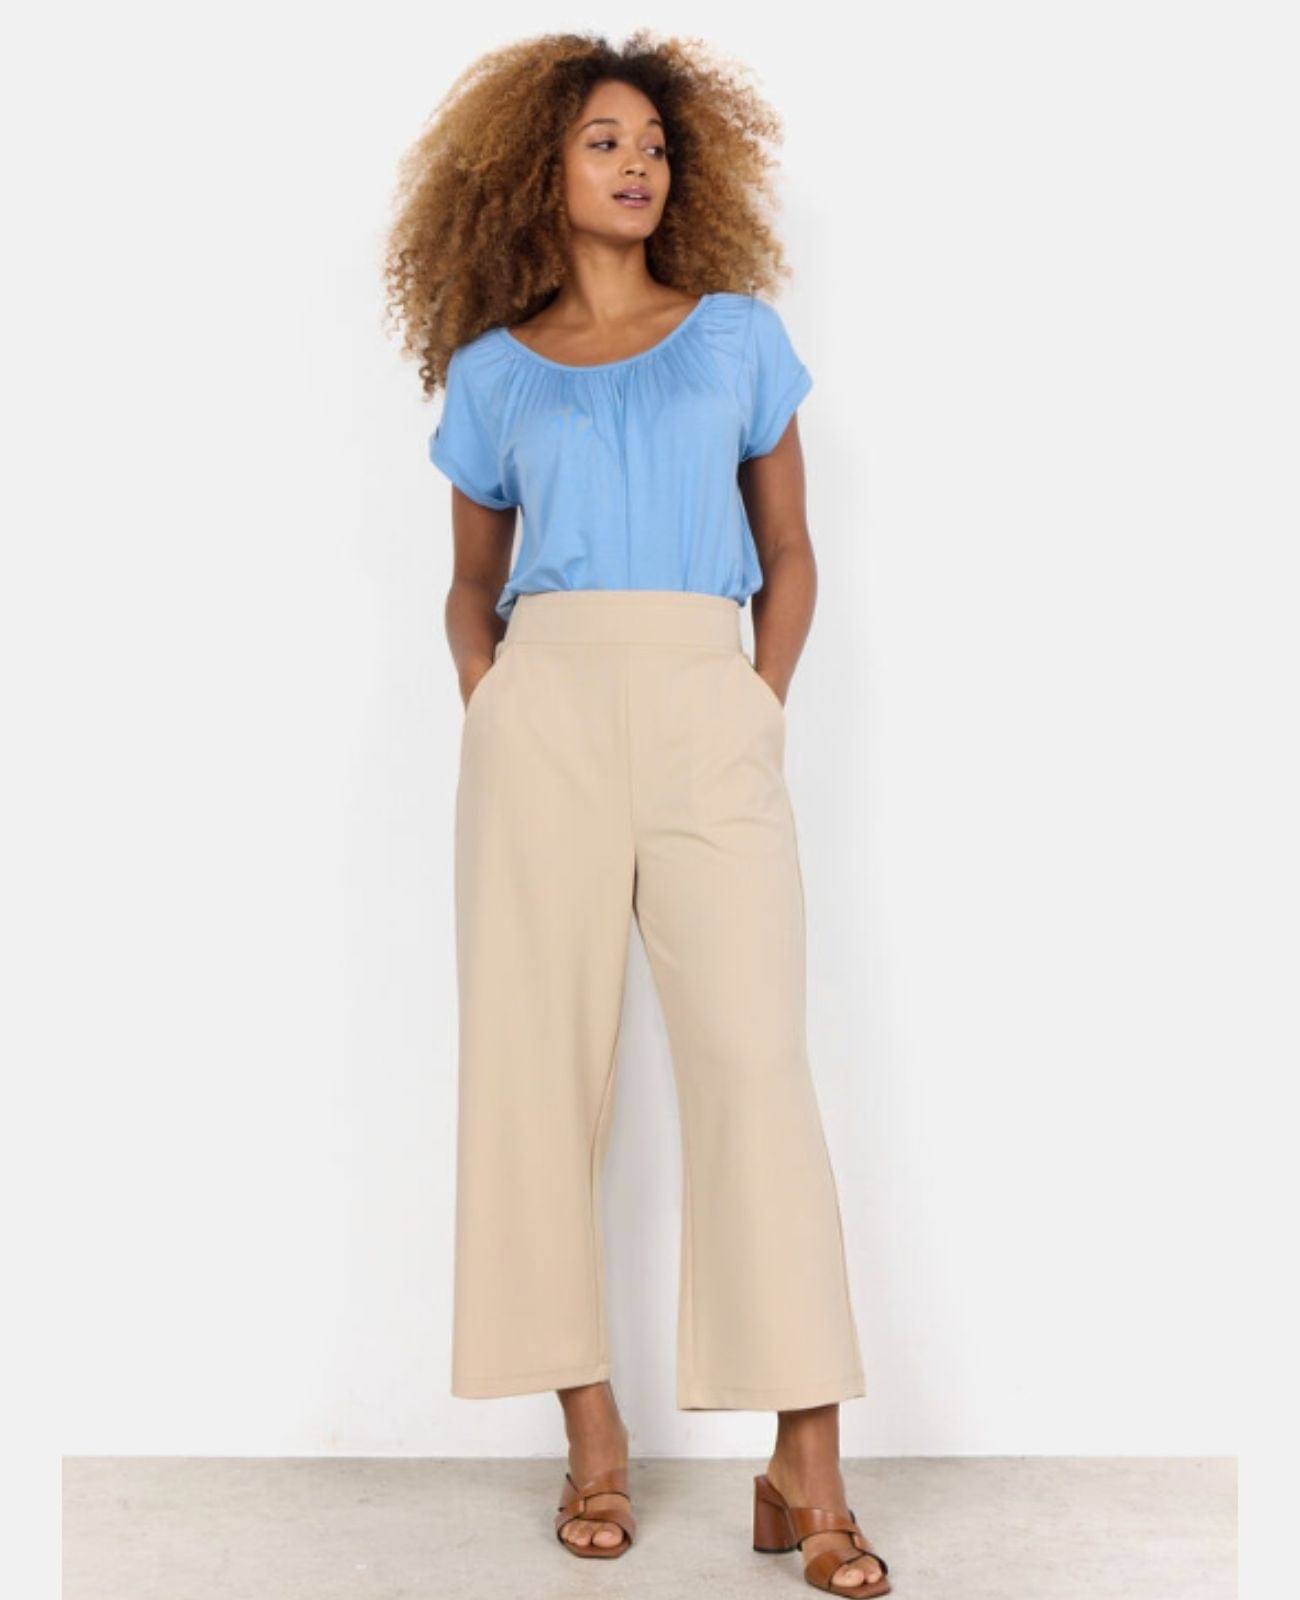 Marciano Forever Young Scalloped Bandage Top + Aly Belted Wide-Leg Pant